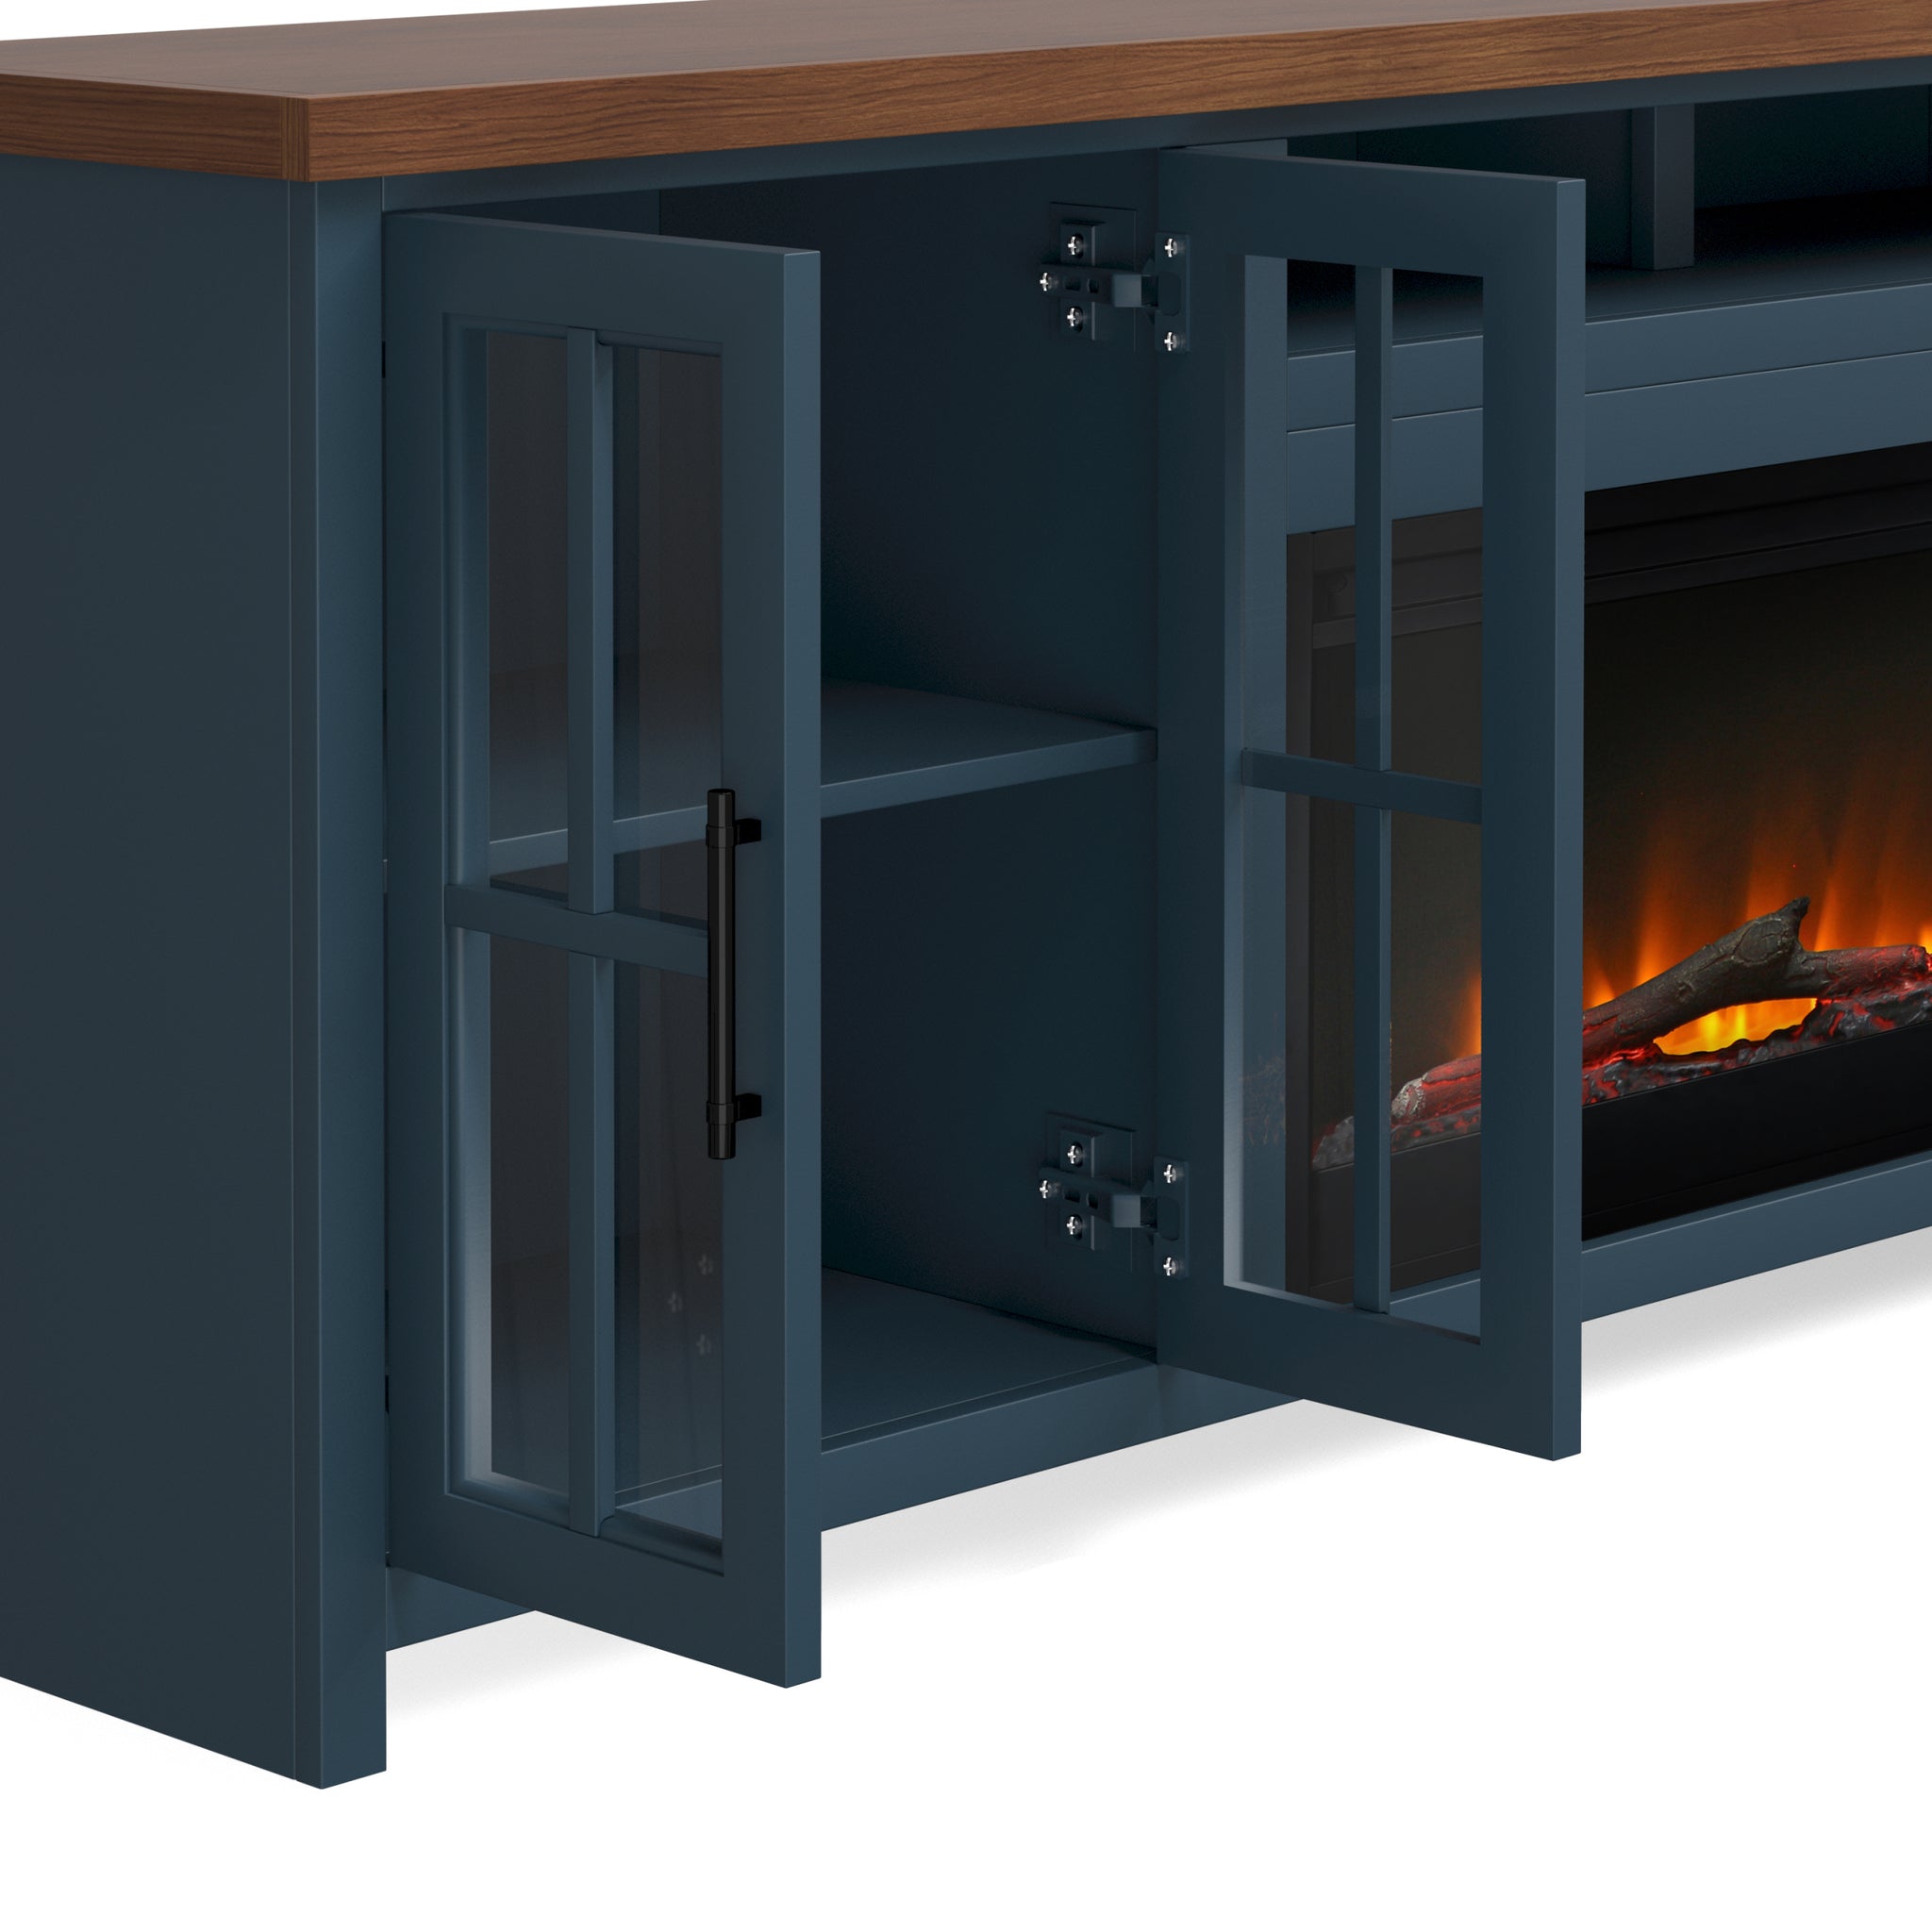 Nantucket 97 inch Fireplace TV Stand 41-50-electric-no-blue-400-vent free-primary